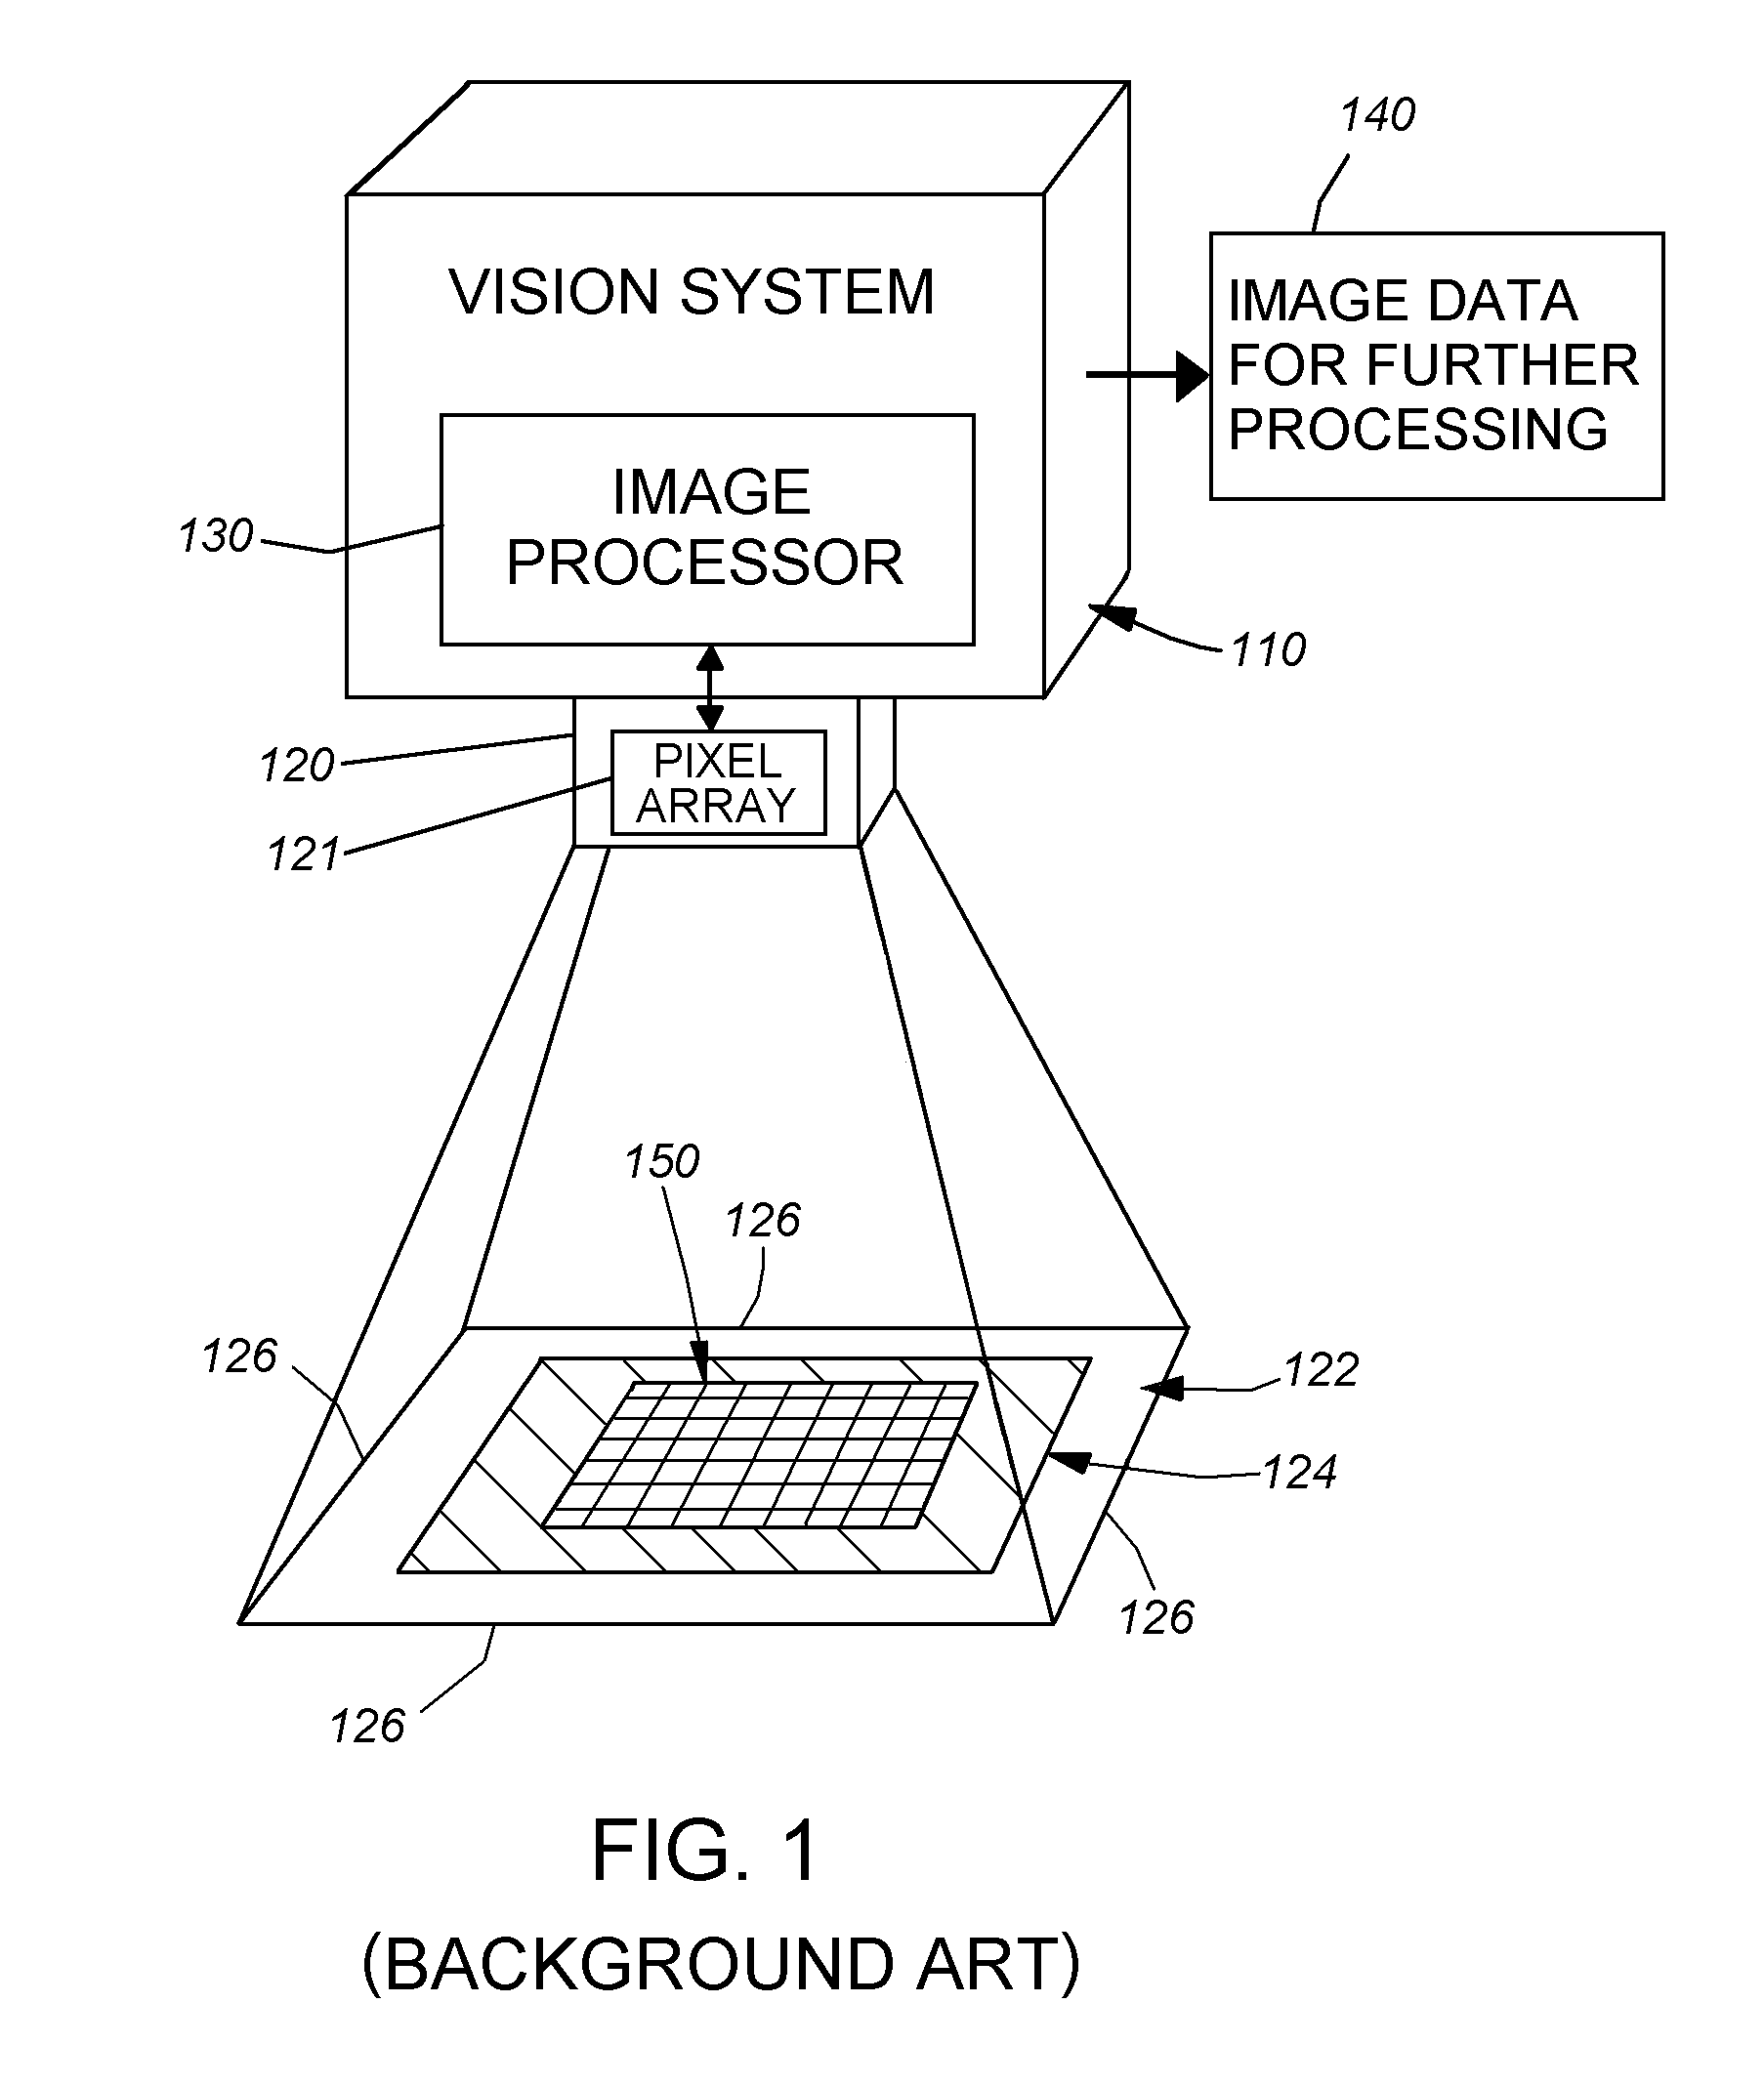 System and method for processing image data relative to a focus of attention within the overall image